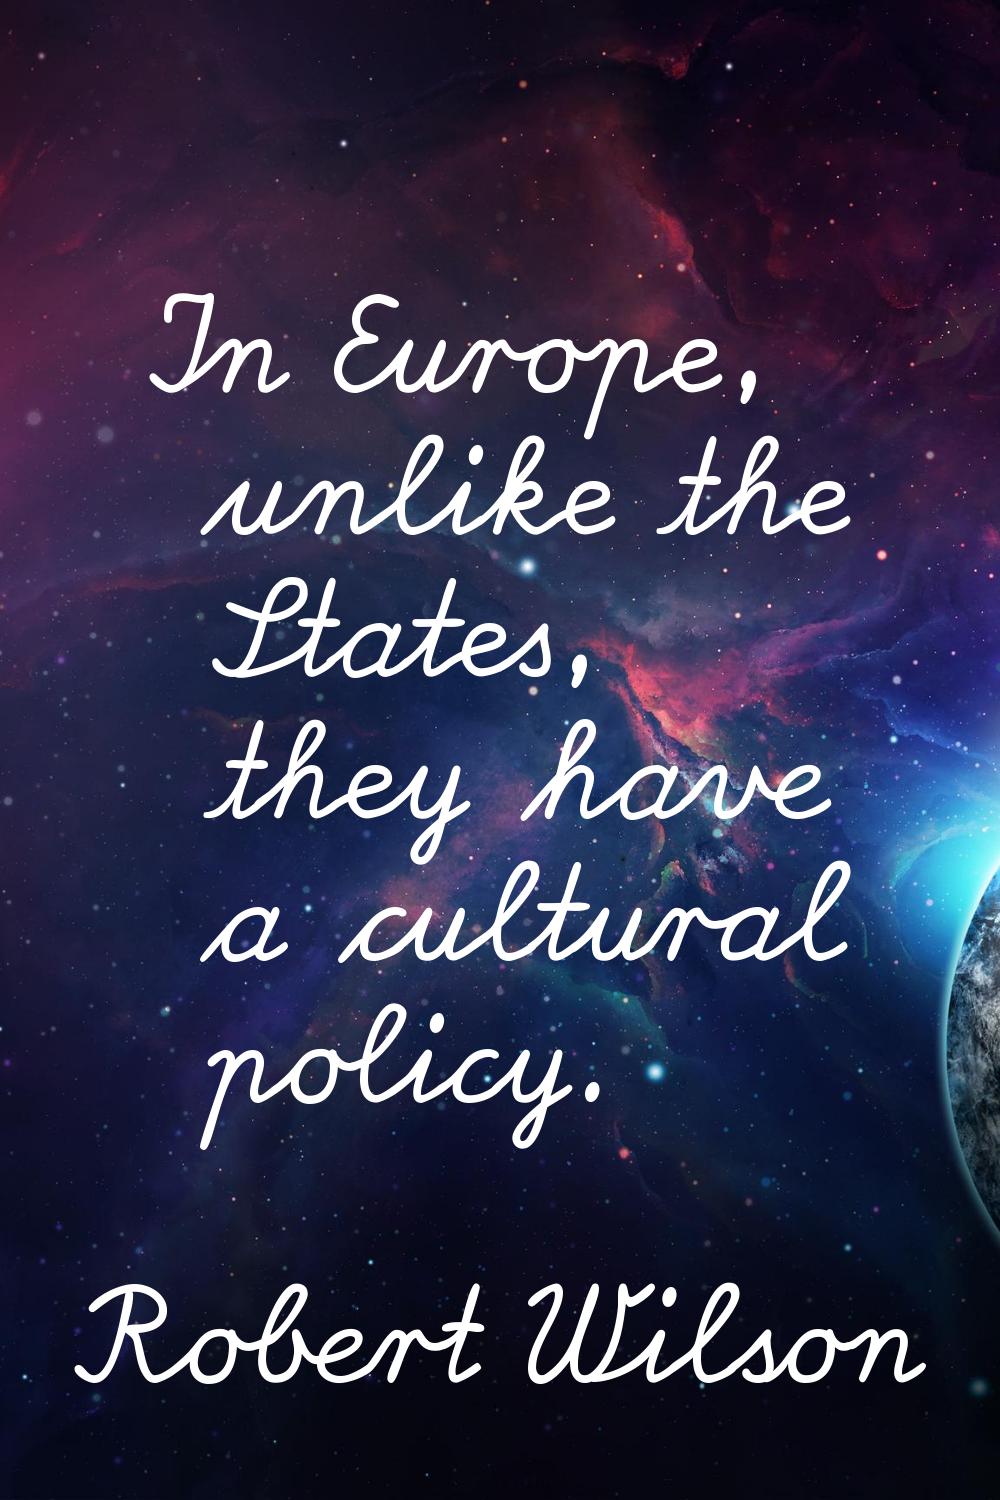 In Europe, unlike the States, they have a cultural policy.